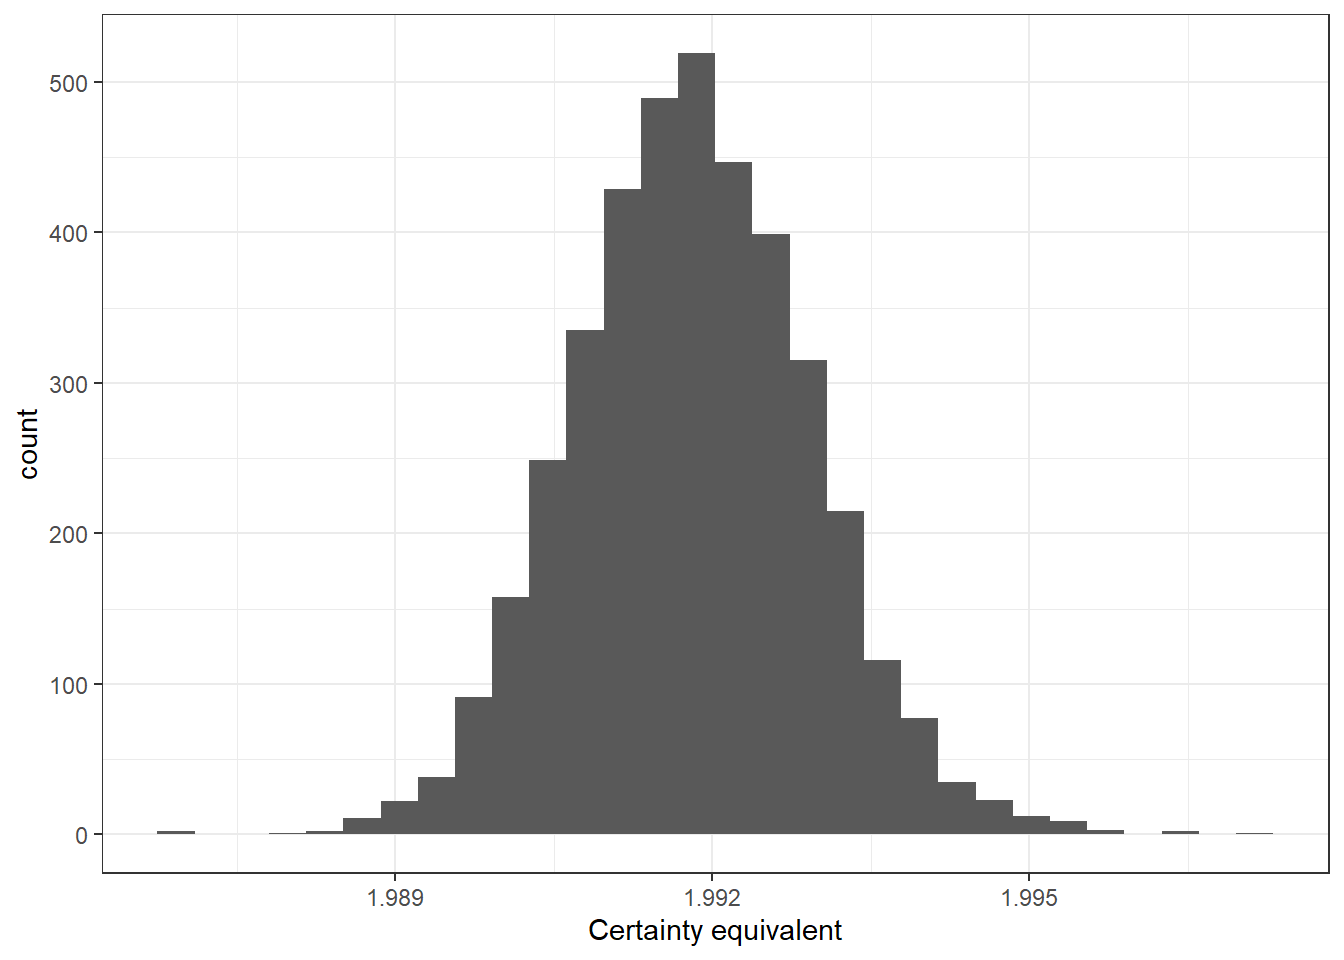 Posterior distribution of the certainty equivalent of the risky lottery